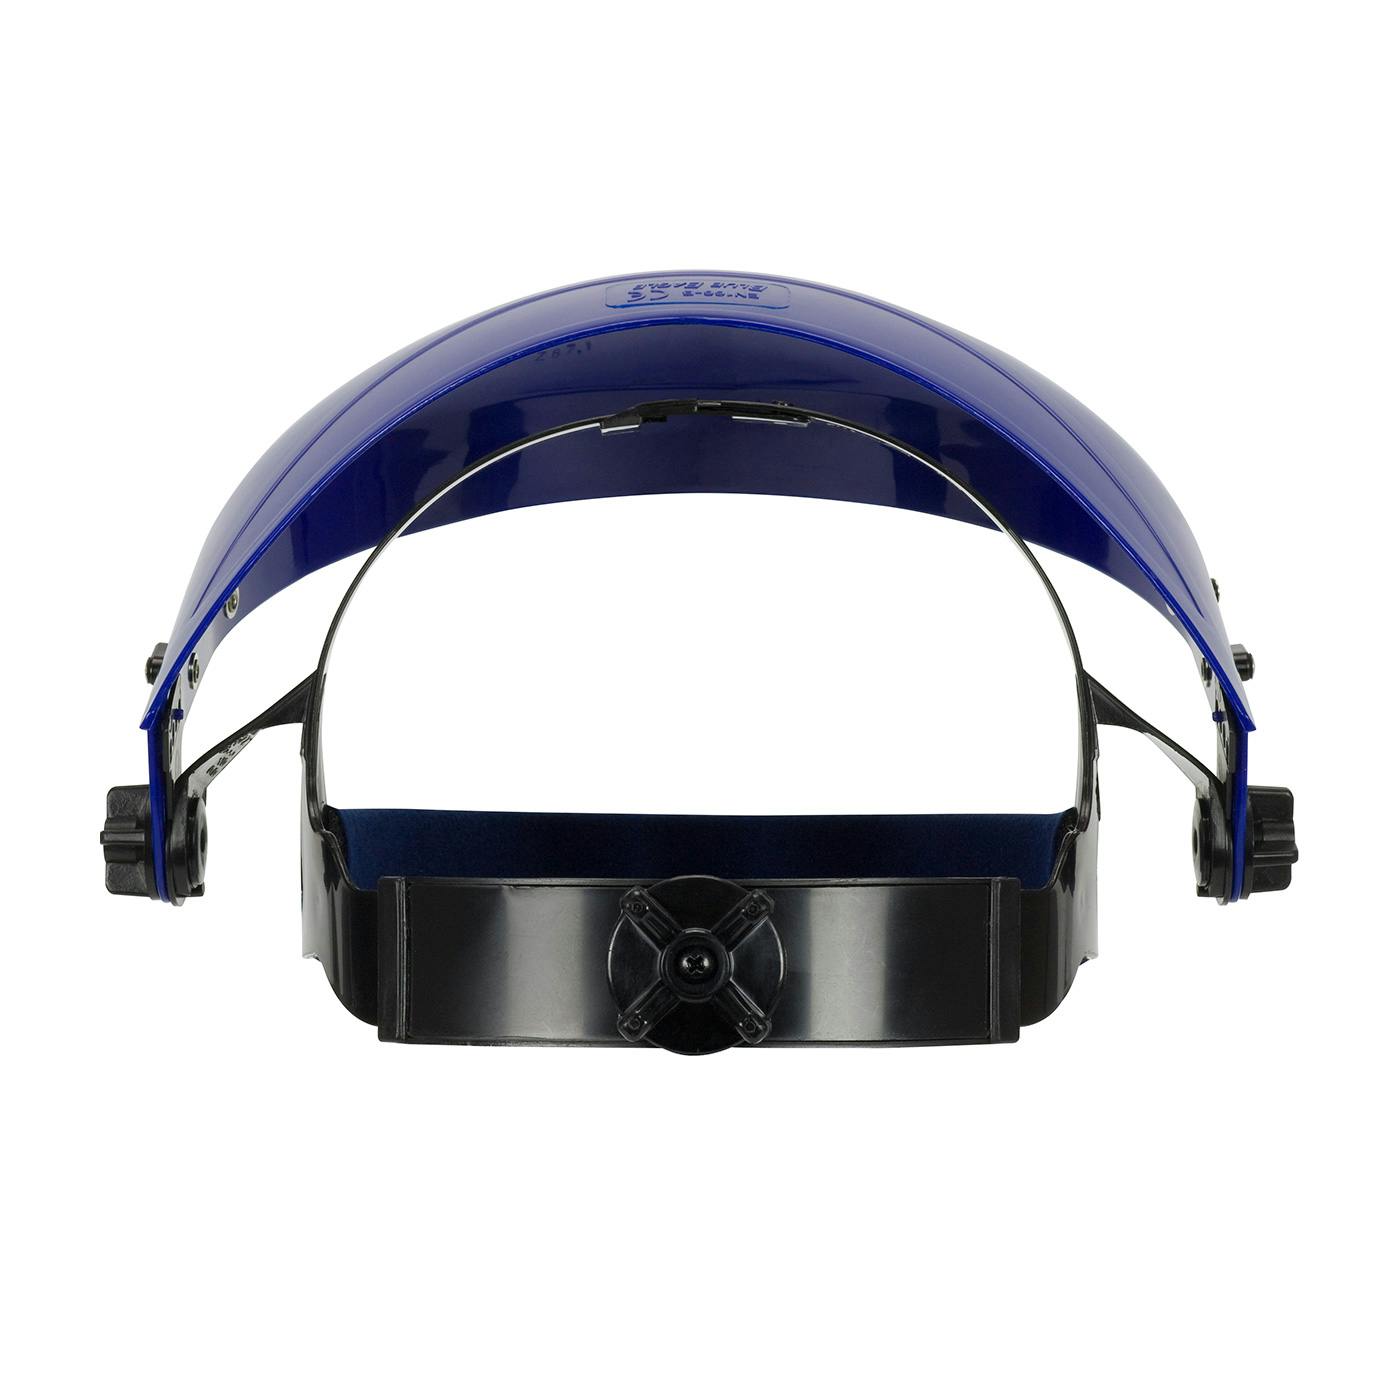 Headgear for Face Protection with Ratchet Suspension - Economy, Blue (251-01-5400) - OS